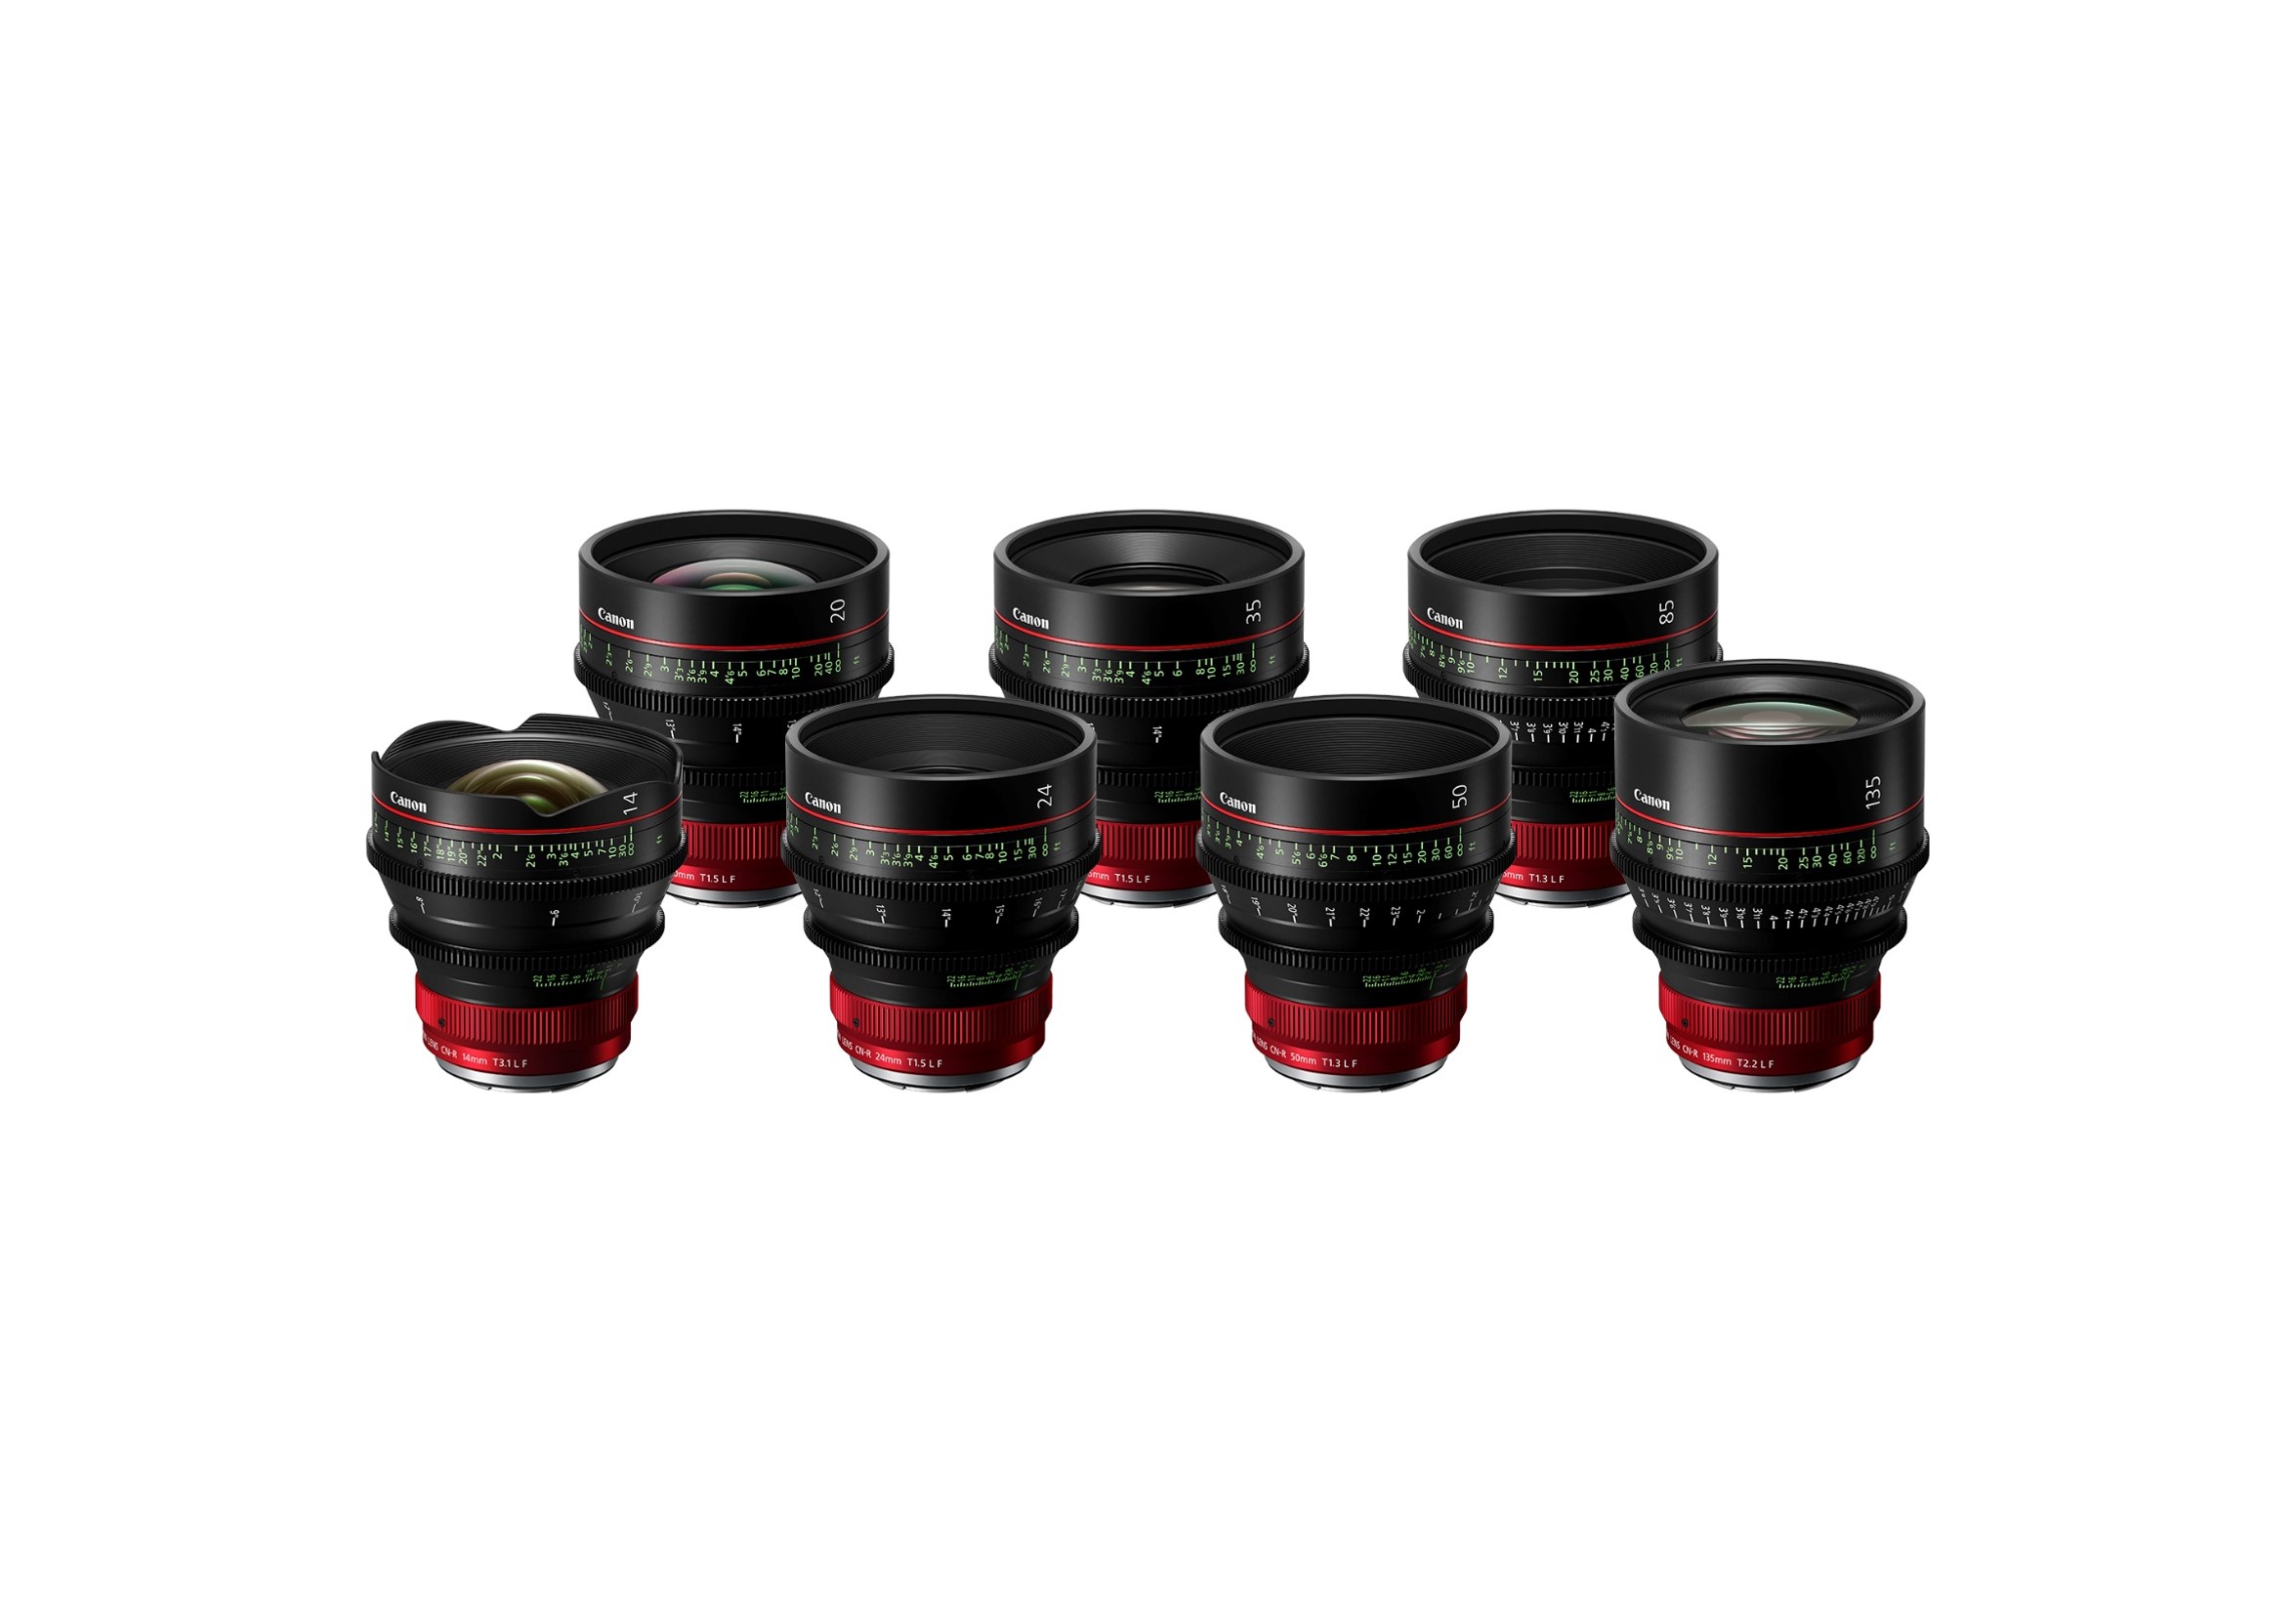 Canon Announces the Launch of the New Cinema Prime Lenses with RF Mount Compatible with Super 35mm and Full-frame Camera